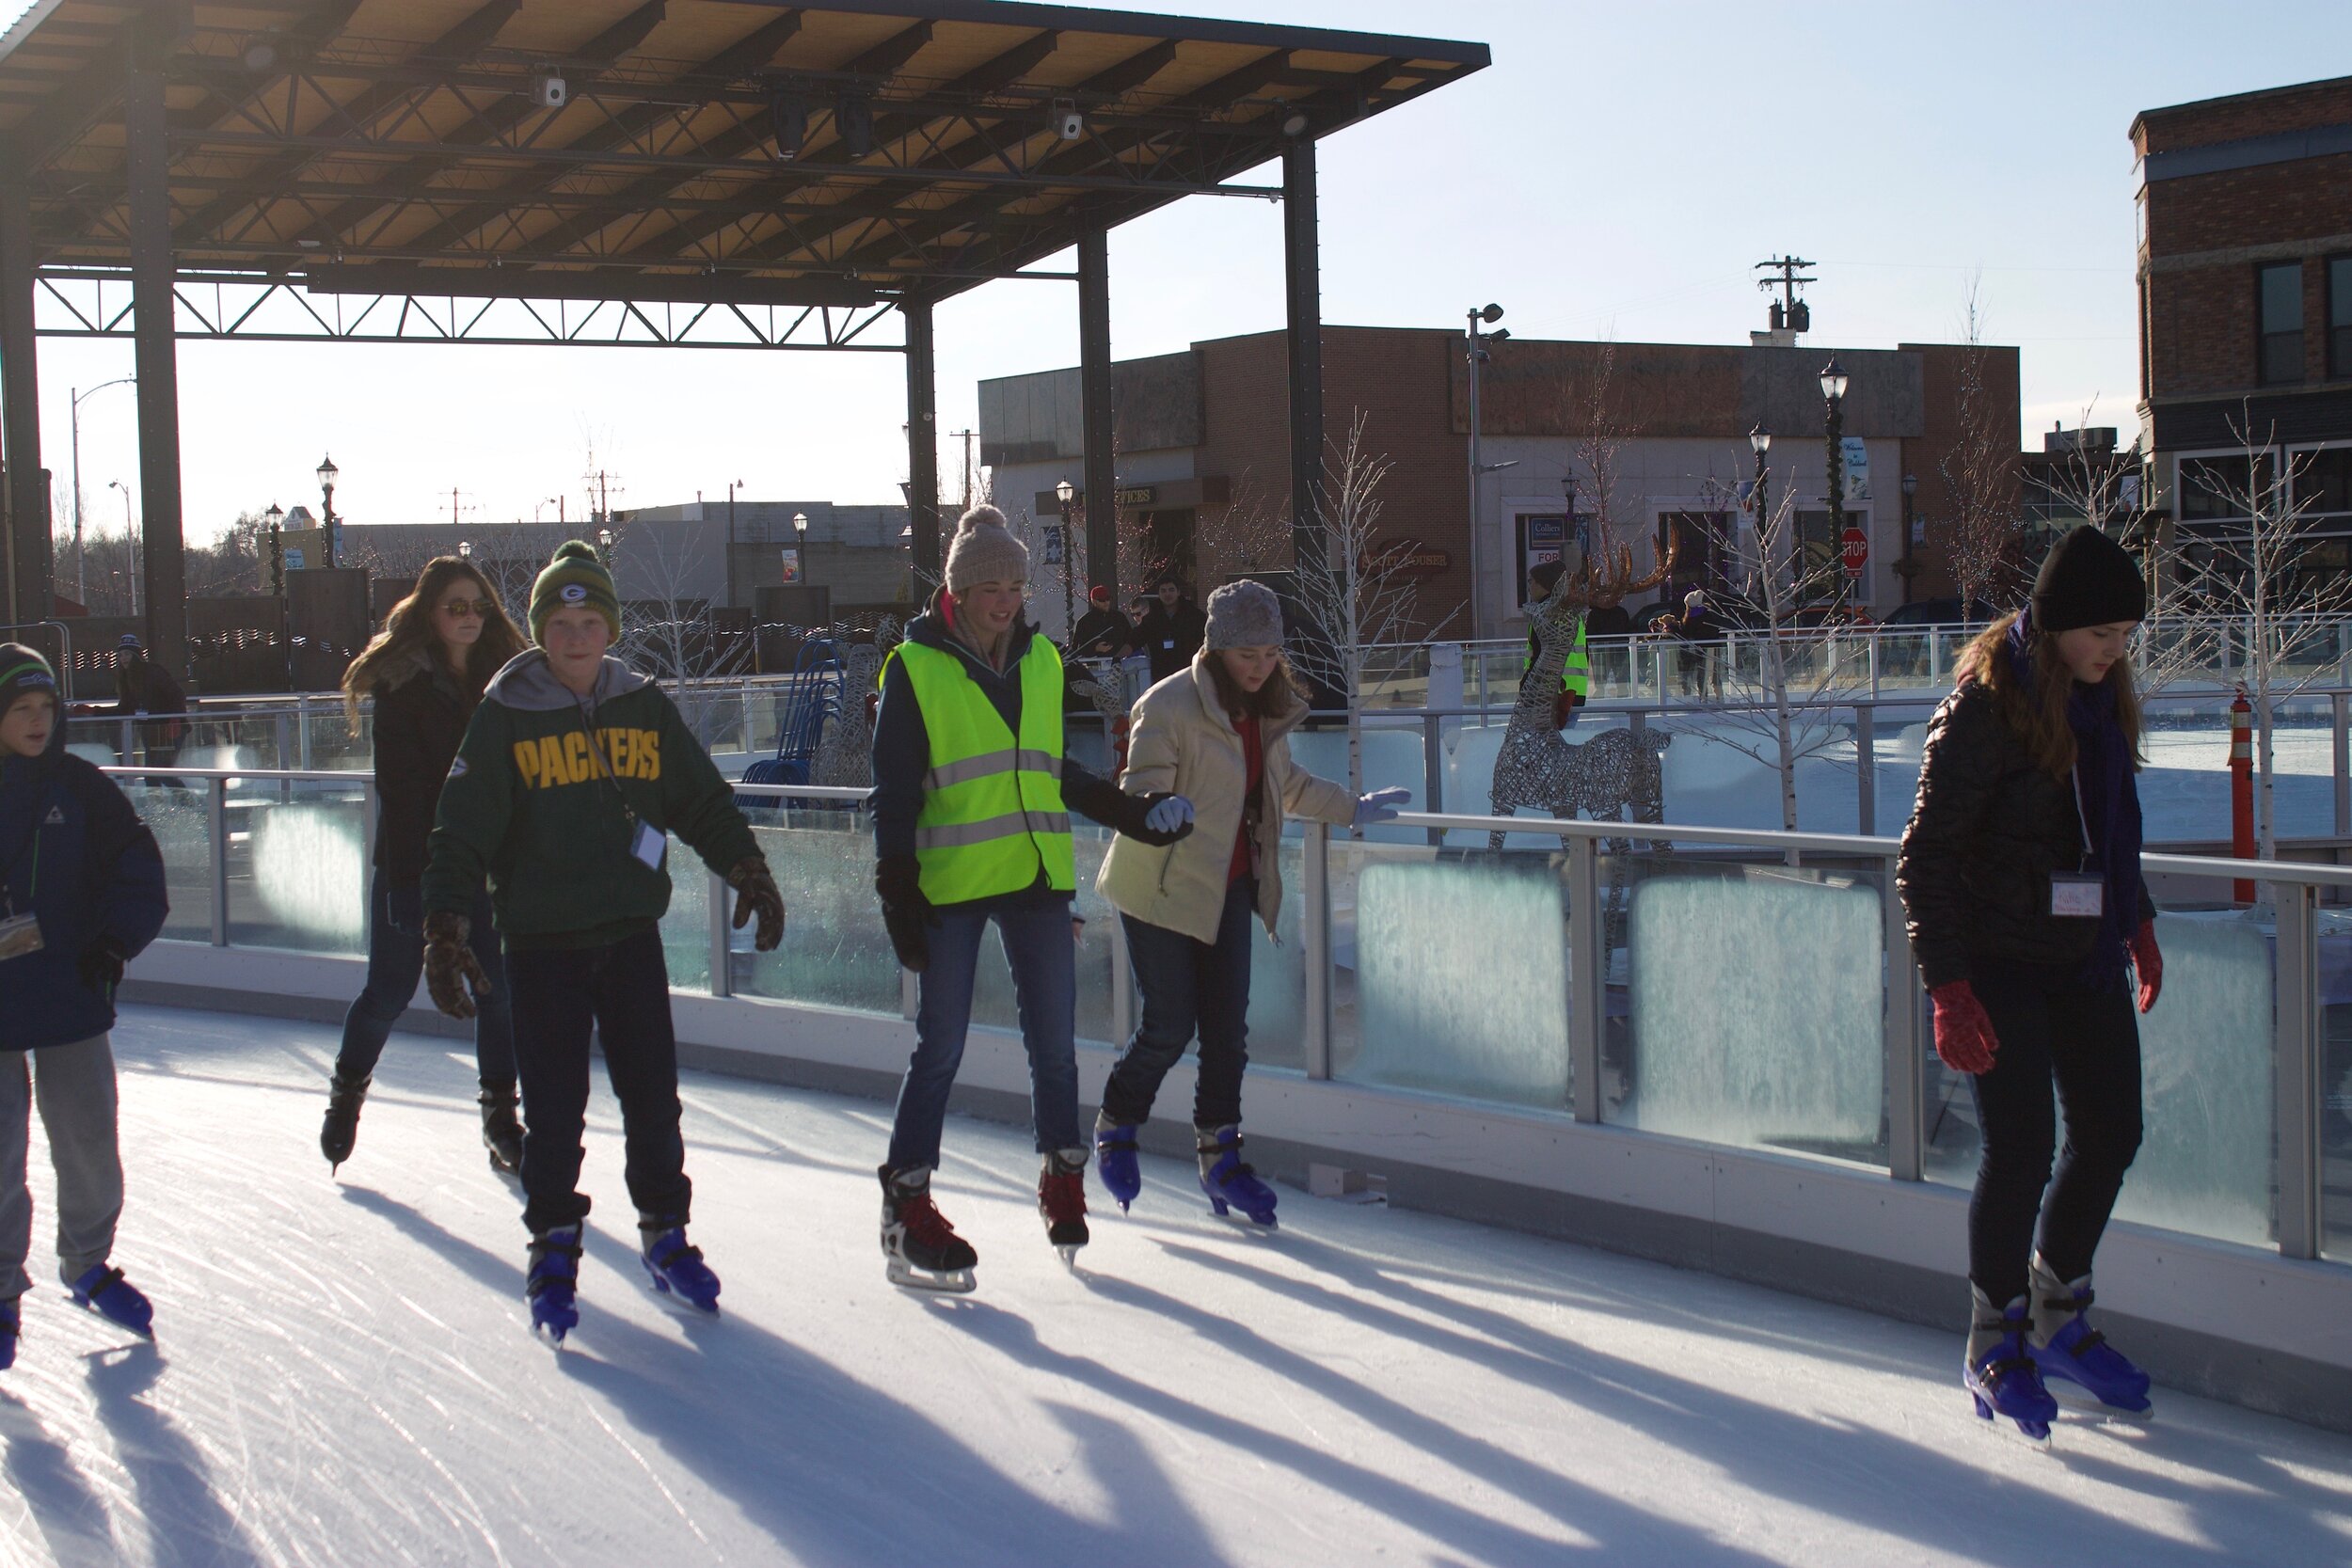 Volunteers offer additional support during free skate